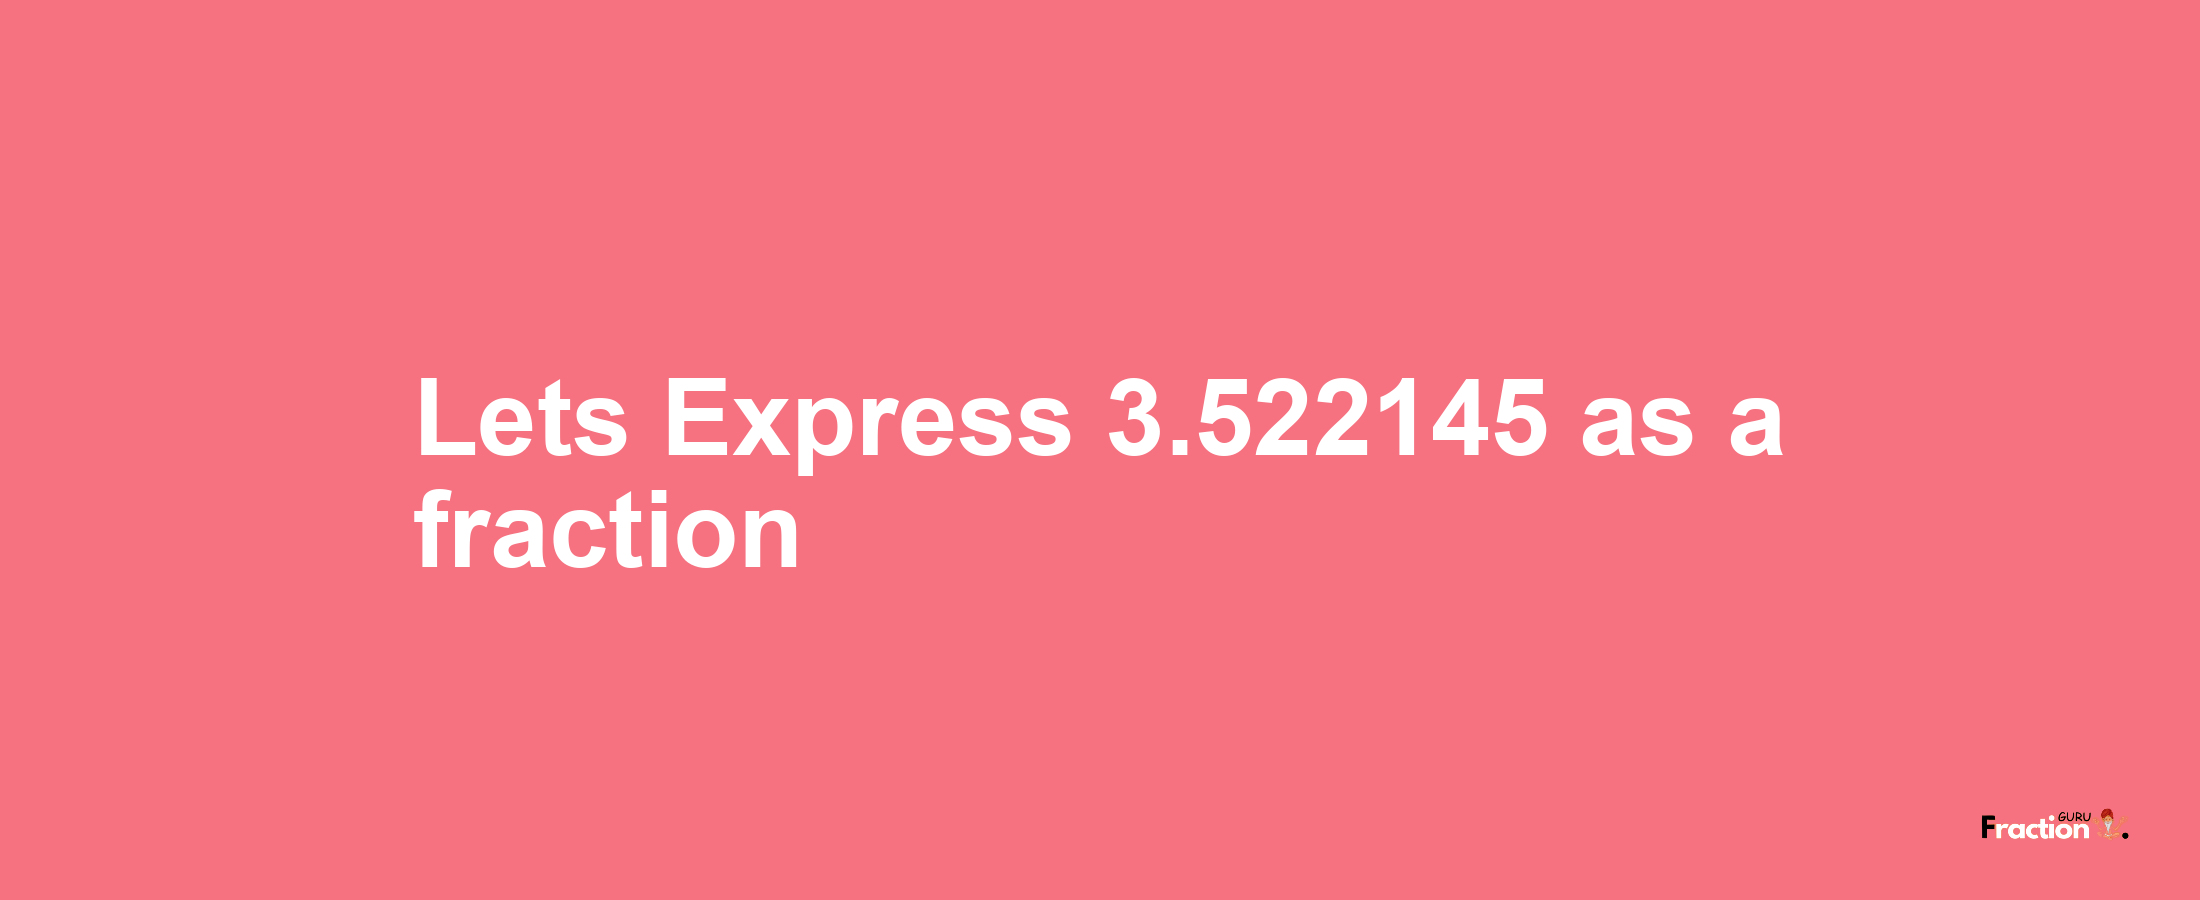 Lets Express 3.522145 as afraction